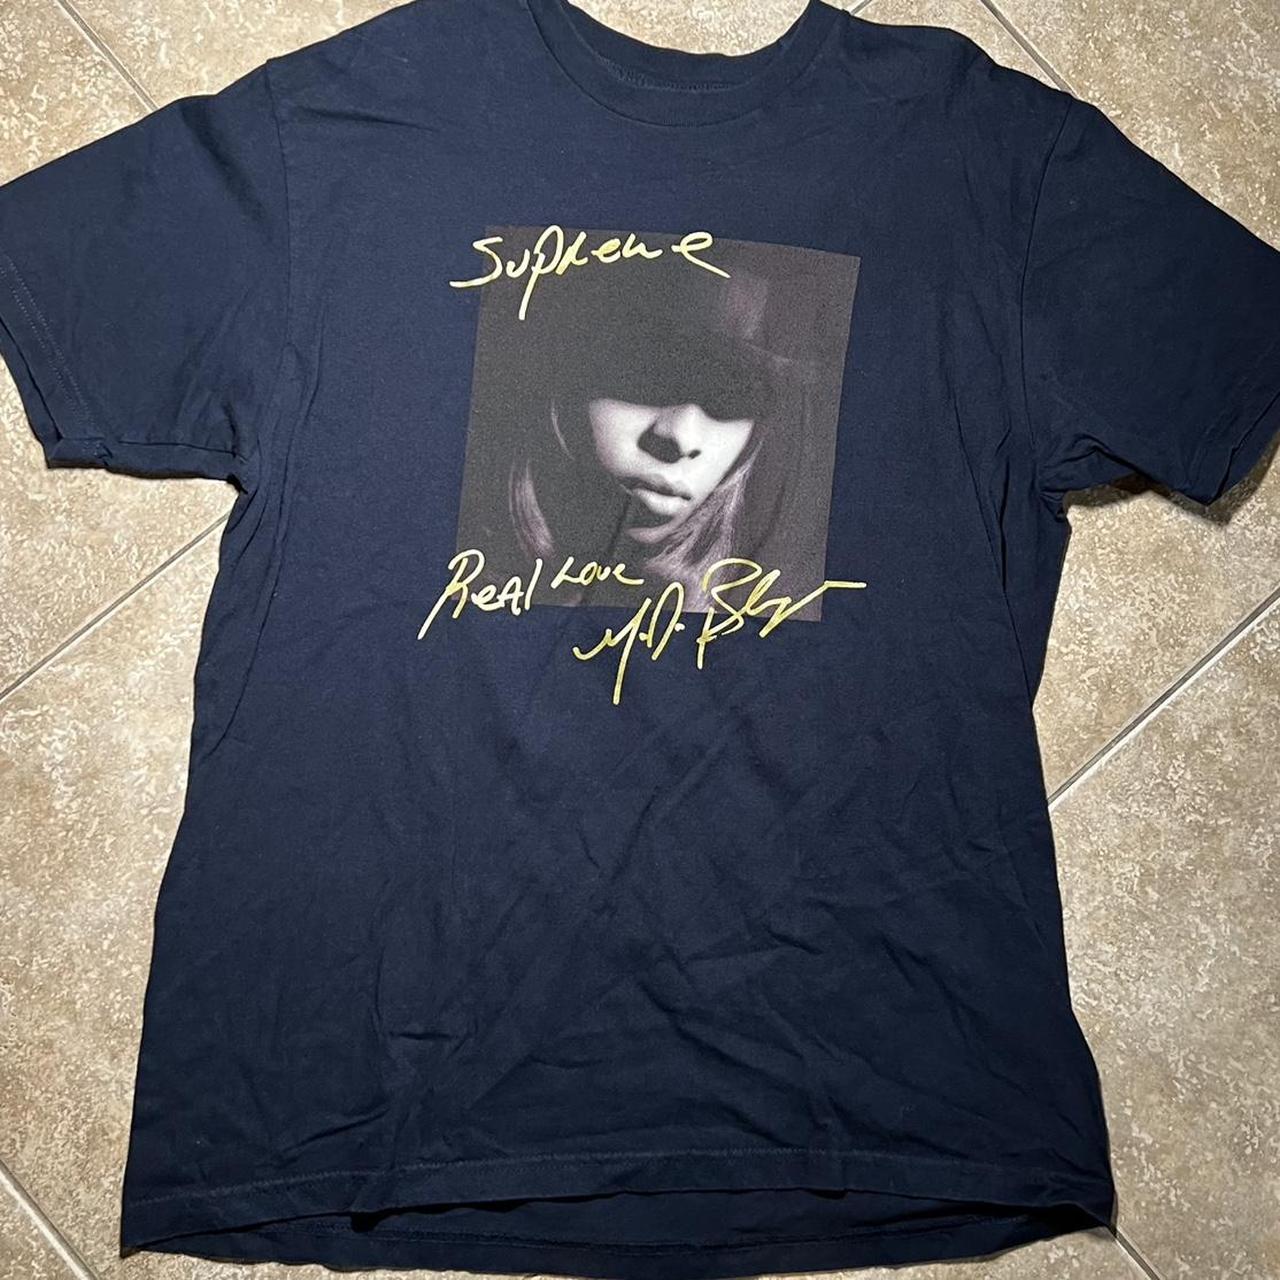 Supreme Mary J Blige Photo tee Open to offers. Any... - Depop